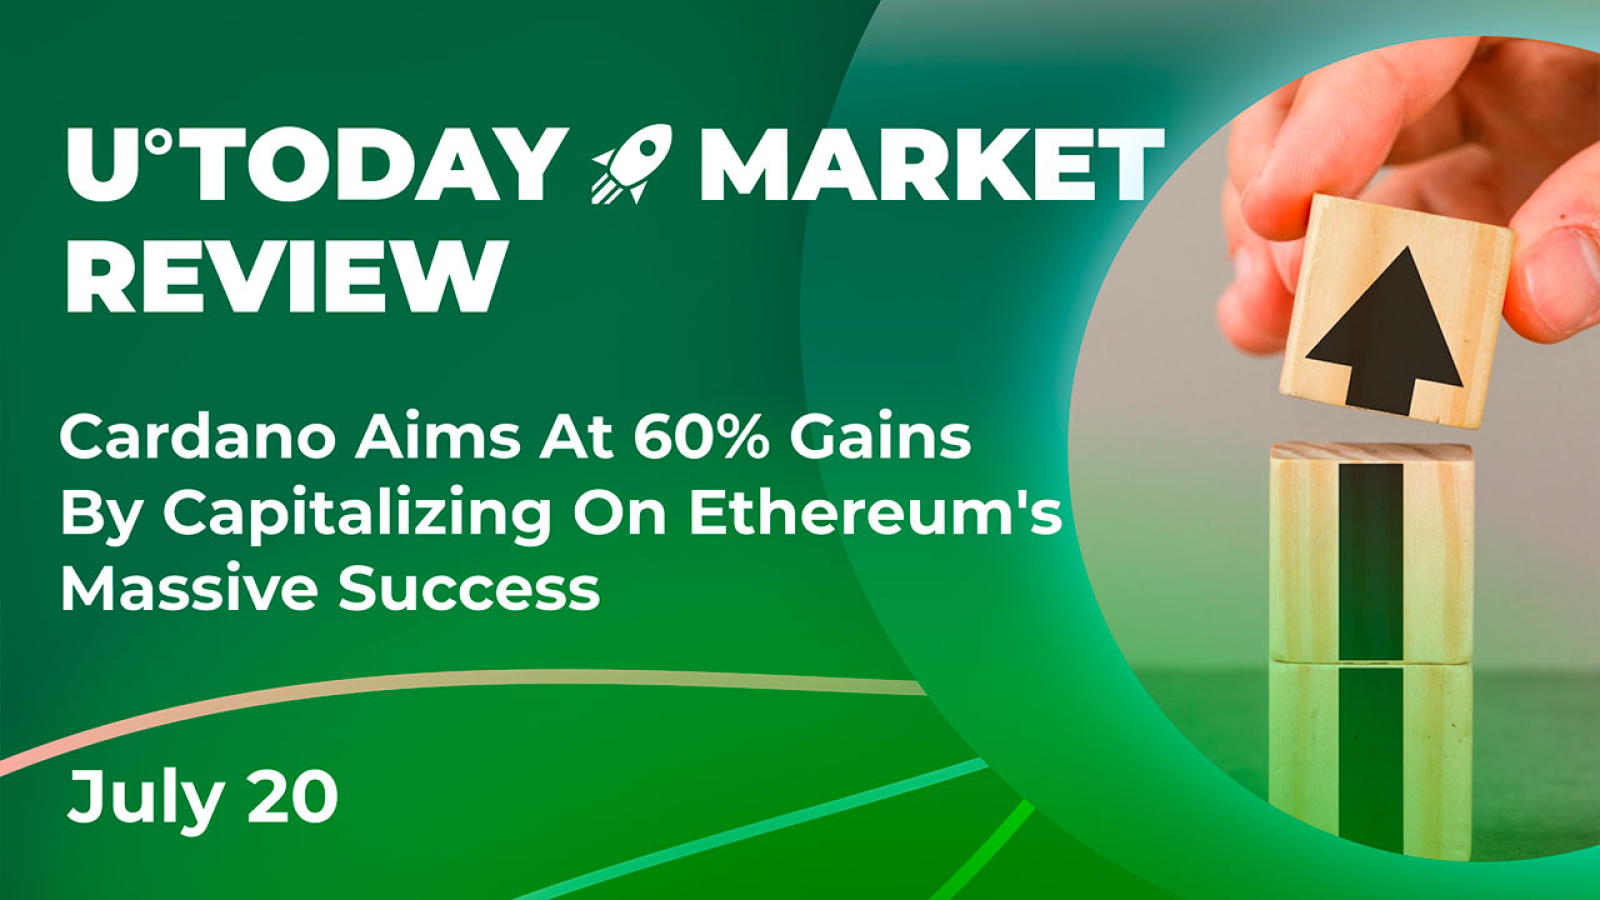 Cardano Aims at 60% Gains by Capitalizing on Ethereum’s Massive Success: Cryptocurrency Market Review, June 20